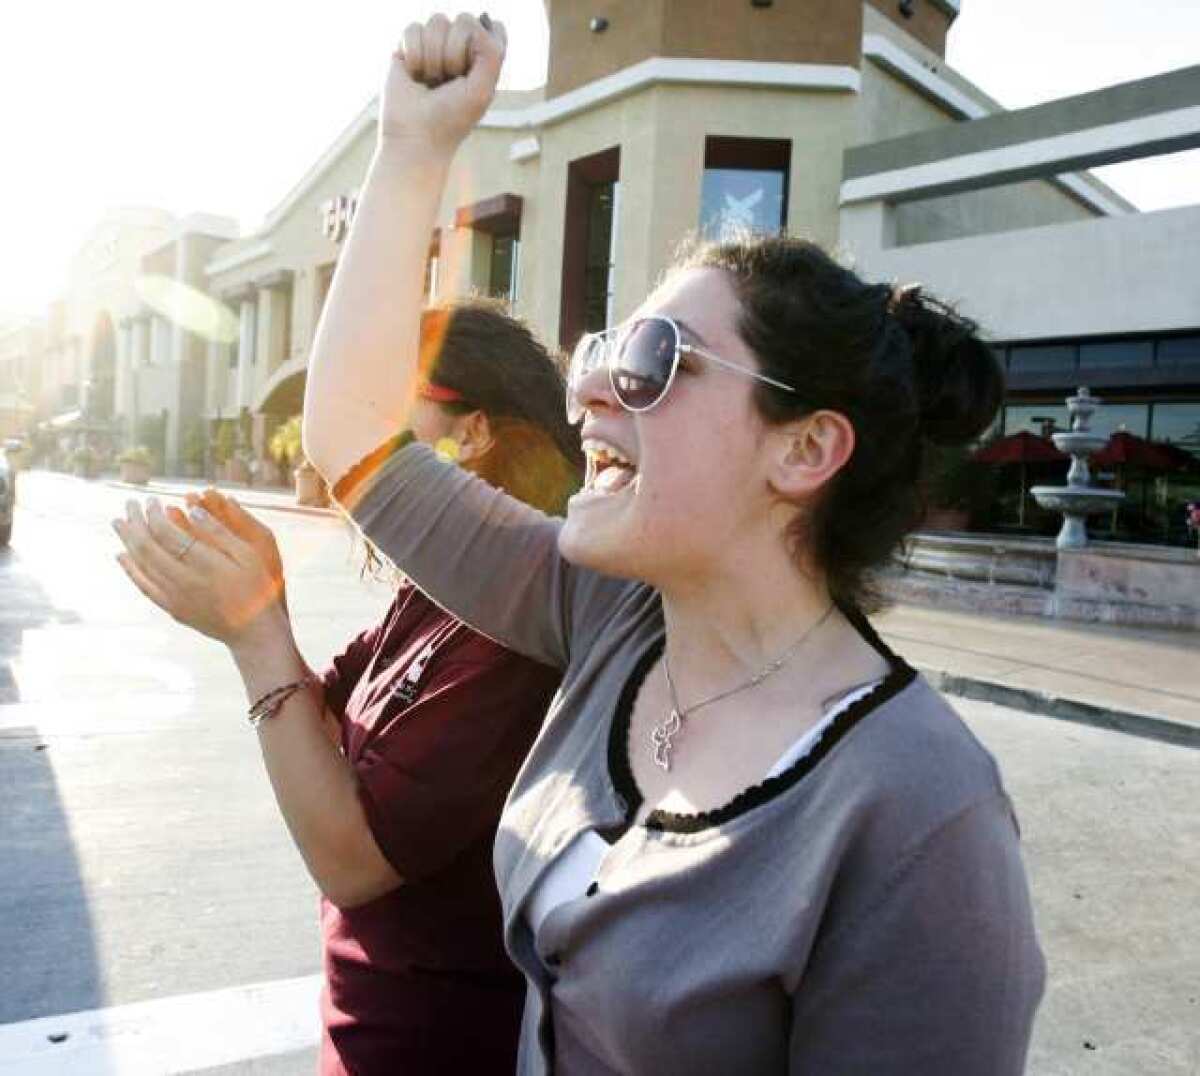 Suzanna Sargsyan, 19, chants '2, 4, 6, 8, we suppport the end of rape' as she marches along Glendale Avenue as part of a first-time event in Glendale called In Her Shoes to raise awareness to domestic violence and violence toward women.